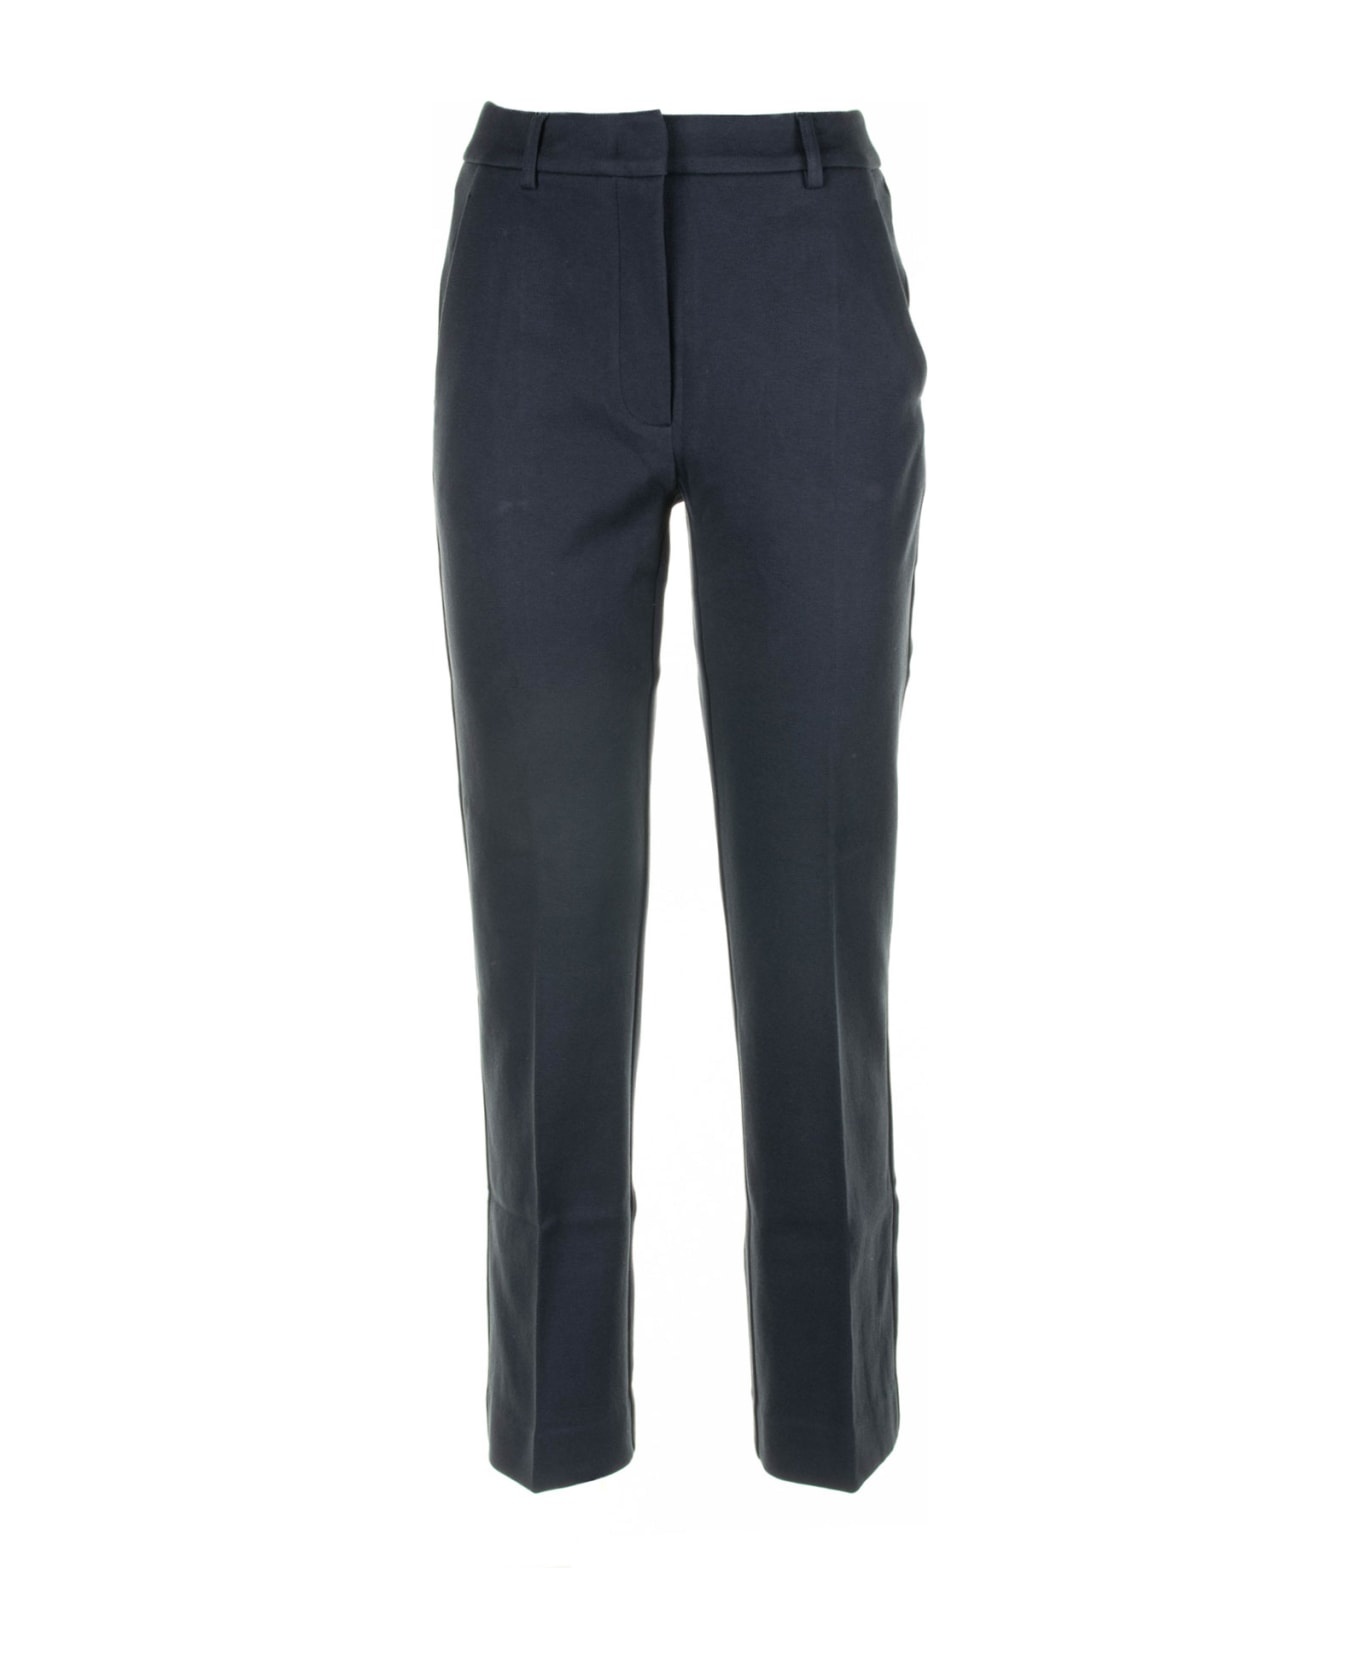 Weekend Max Mara Navy Blue Cotton Trousers - NAVY